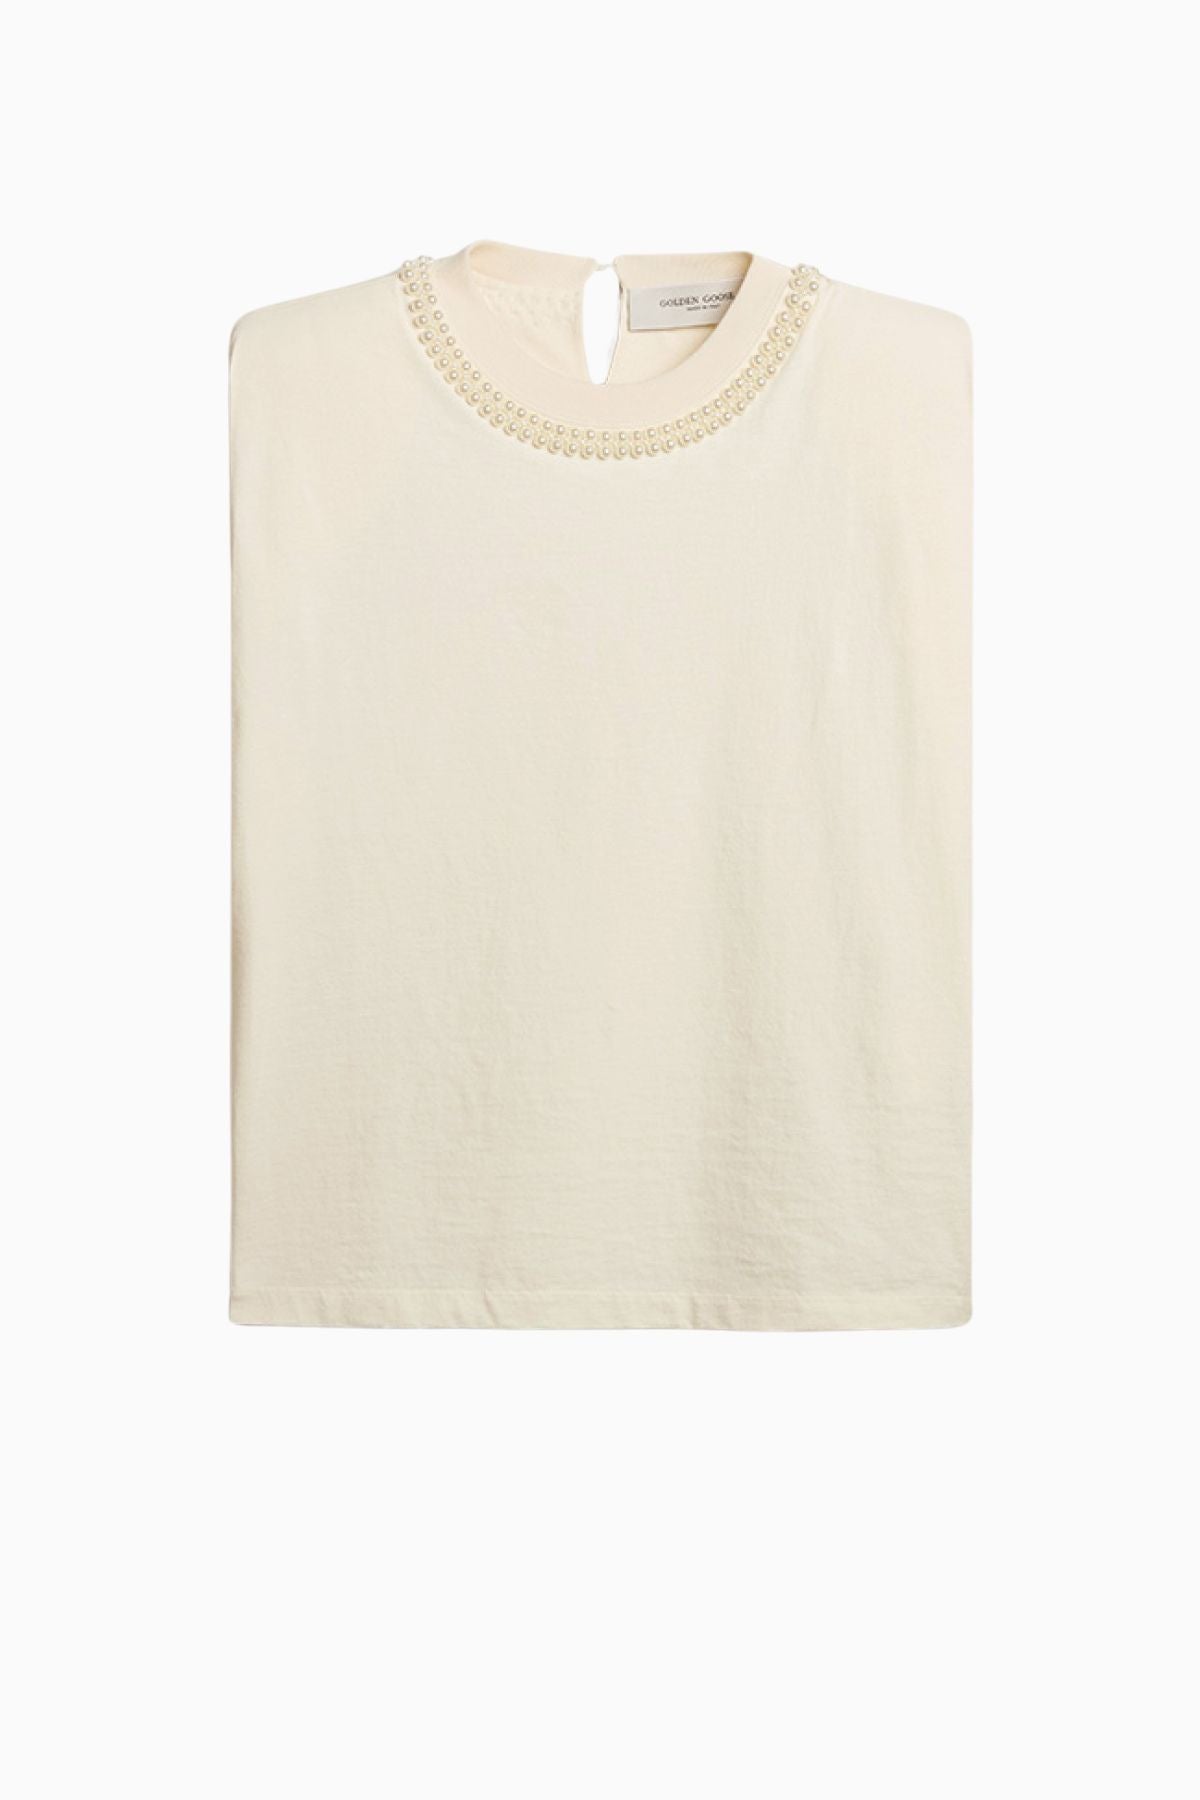 Golden Goose Aged Sleeveless T-Shirt with Pearl Embroidery - Heritage White